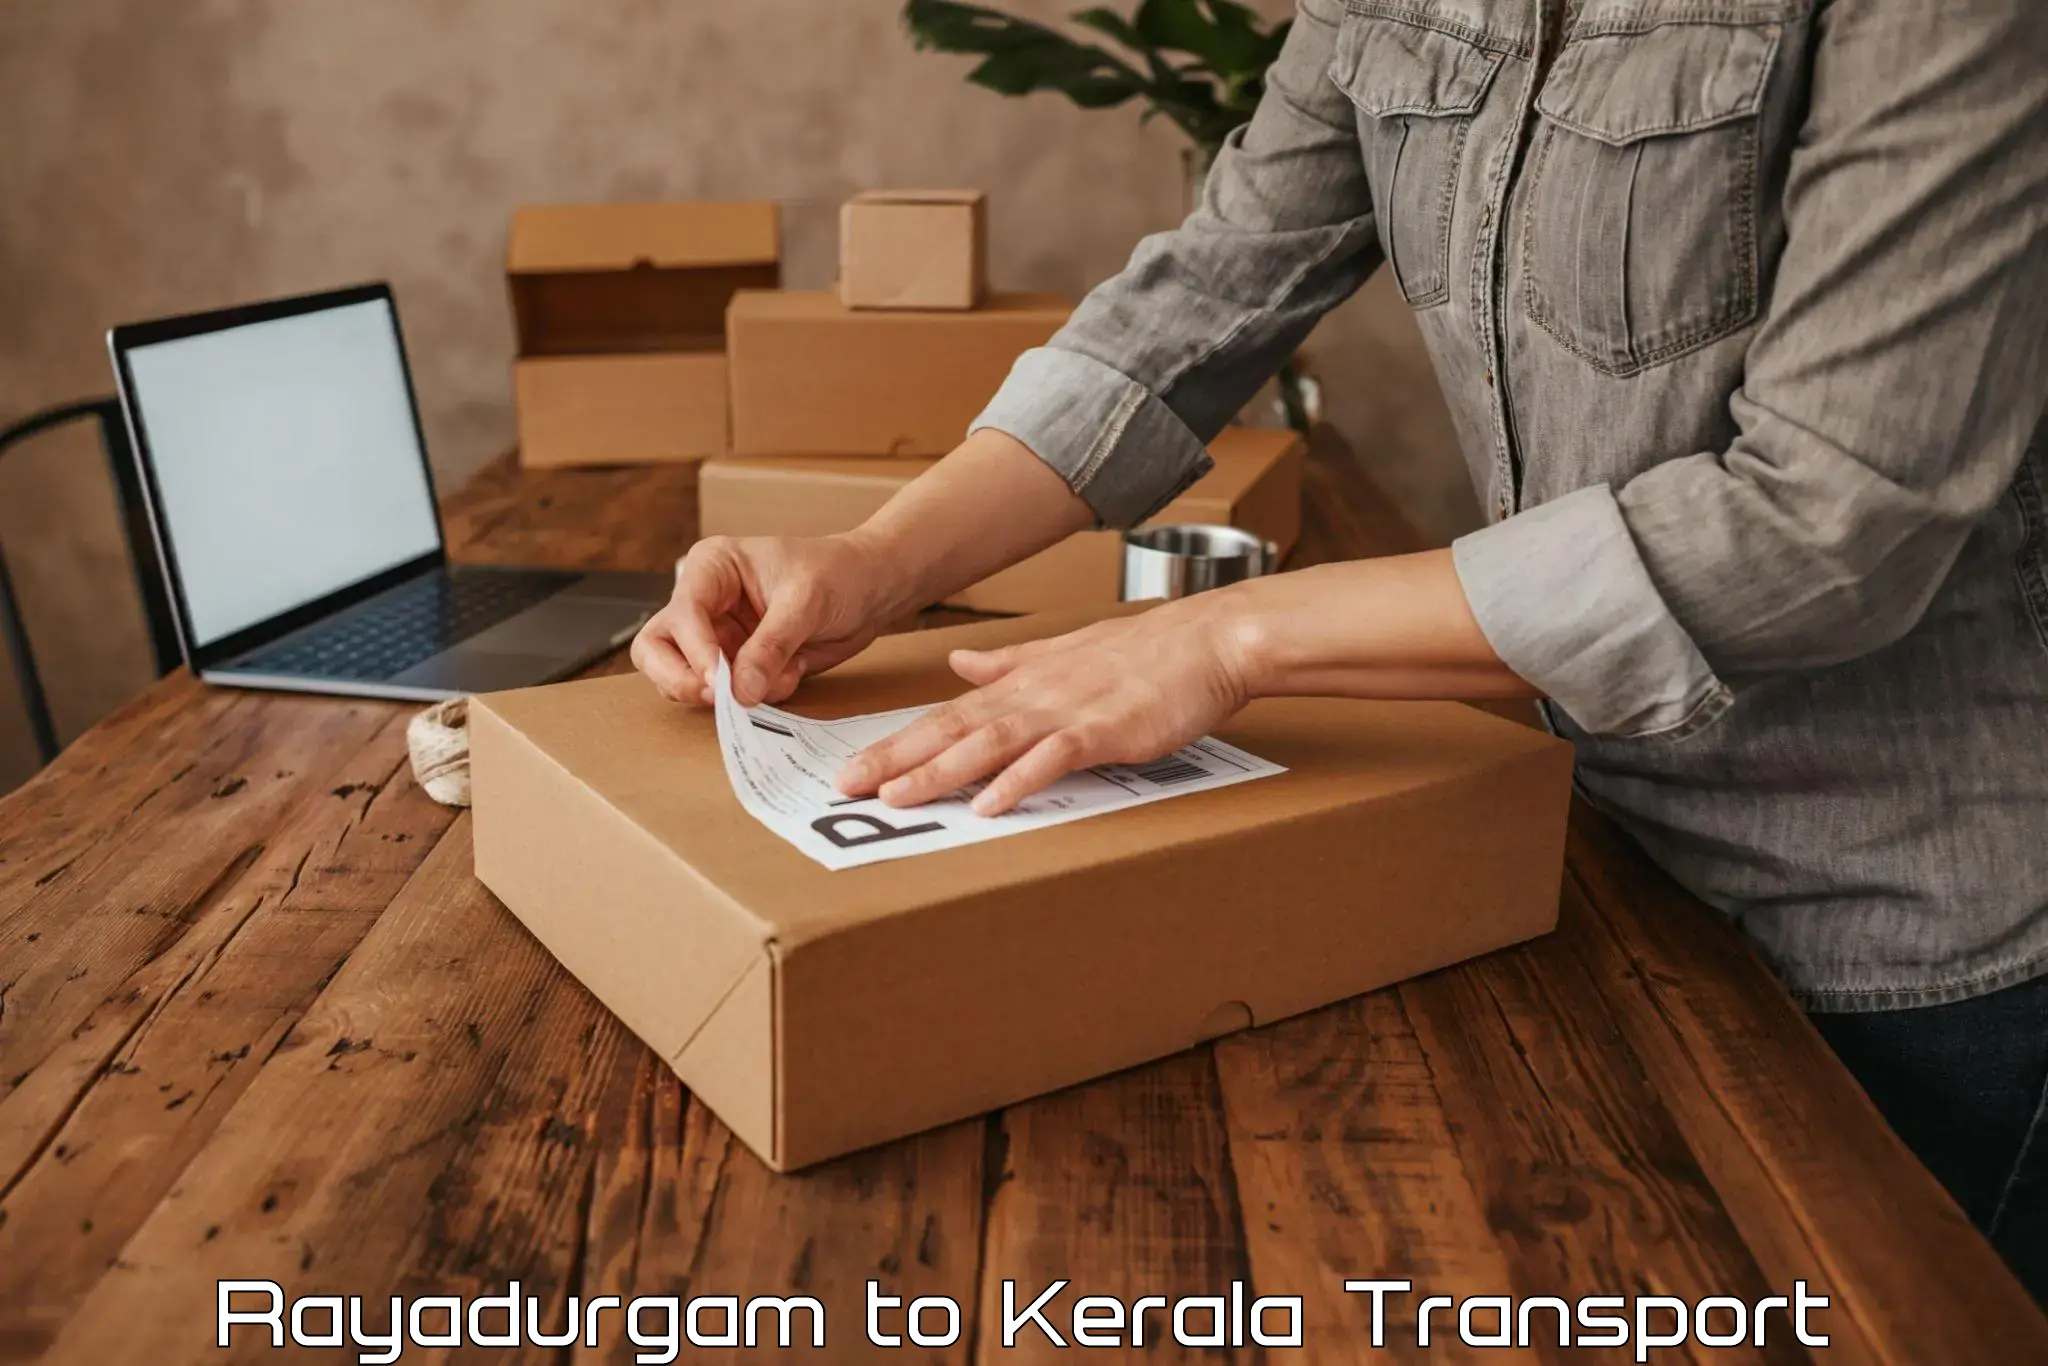 Transport bike from one state to another Rayadurgam to Kerala